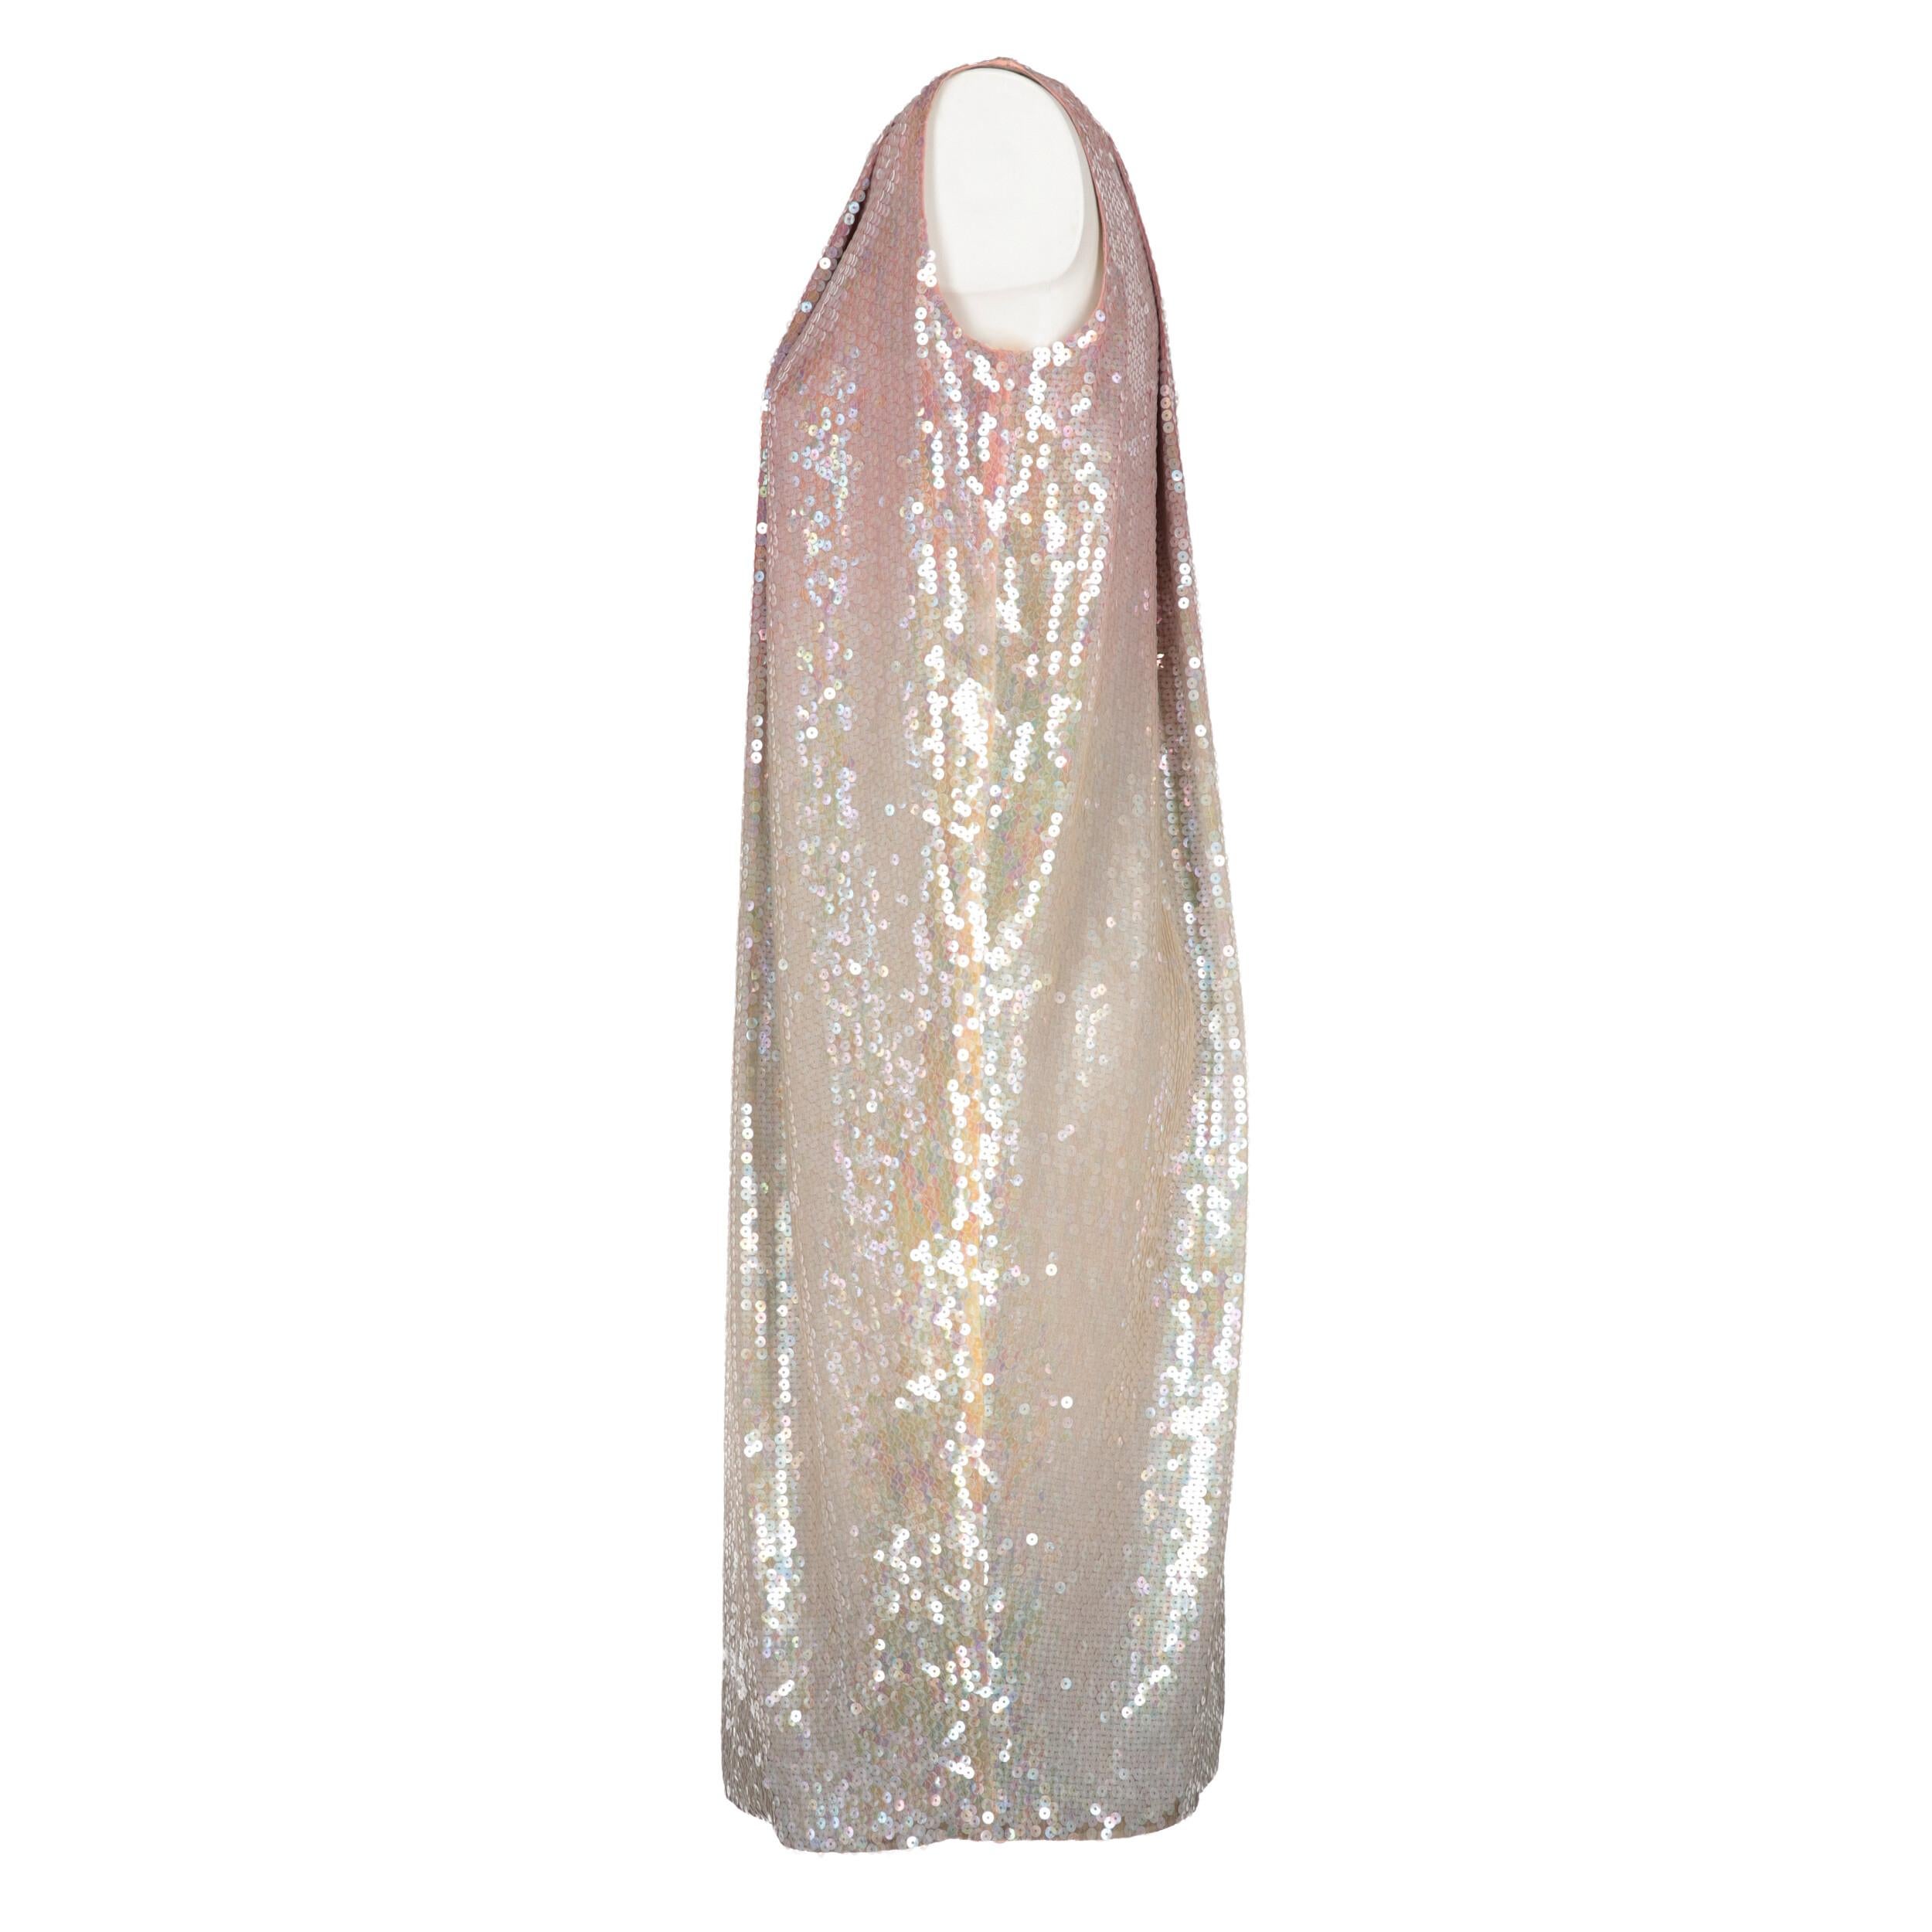 Jil Sander silk sleeveless dress in shades of pink, ivory and light grey, fully sequined. Round neck model with wide front pleat.

Size: 38 IT

Flat measurements
Height: 105 cm
Bust: 47 cm

Product code: X0536

Notes: Item shows slight signs of wear